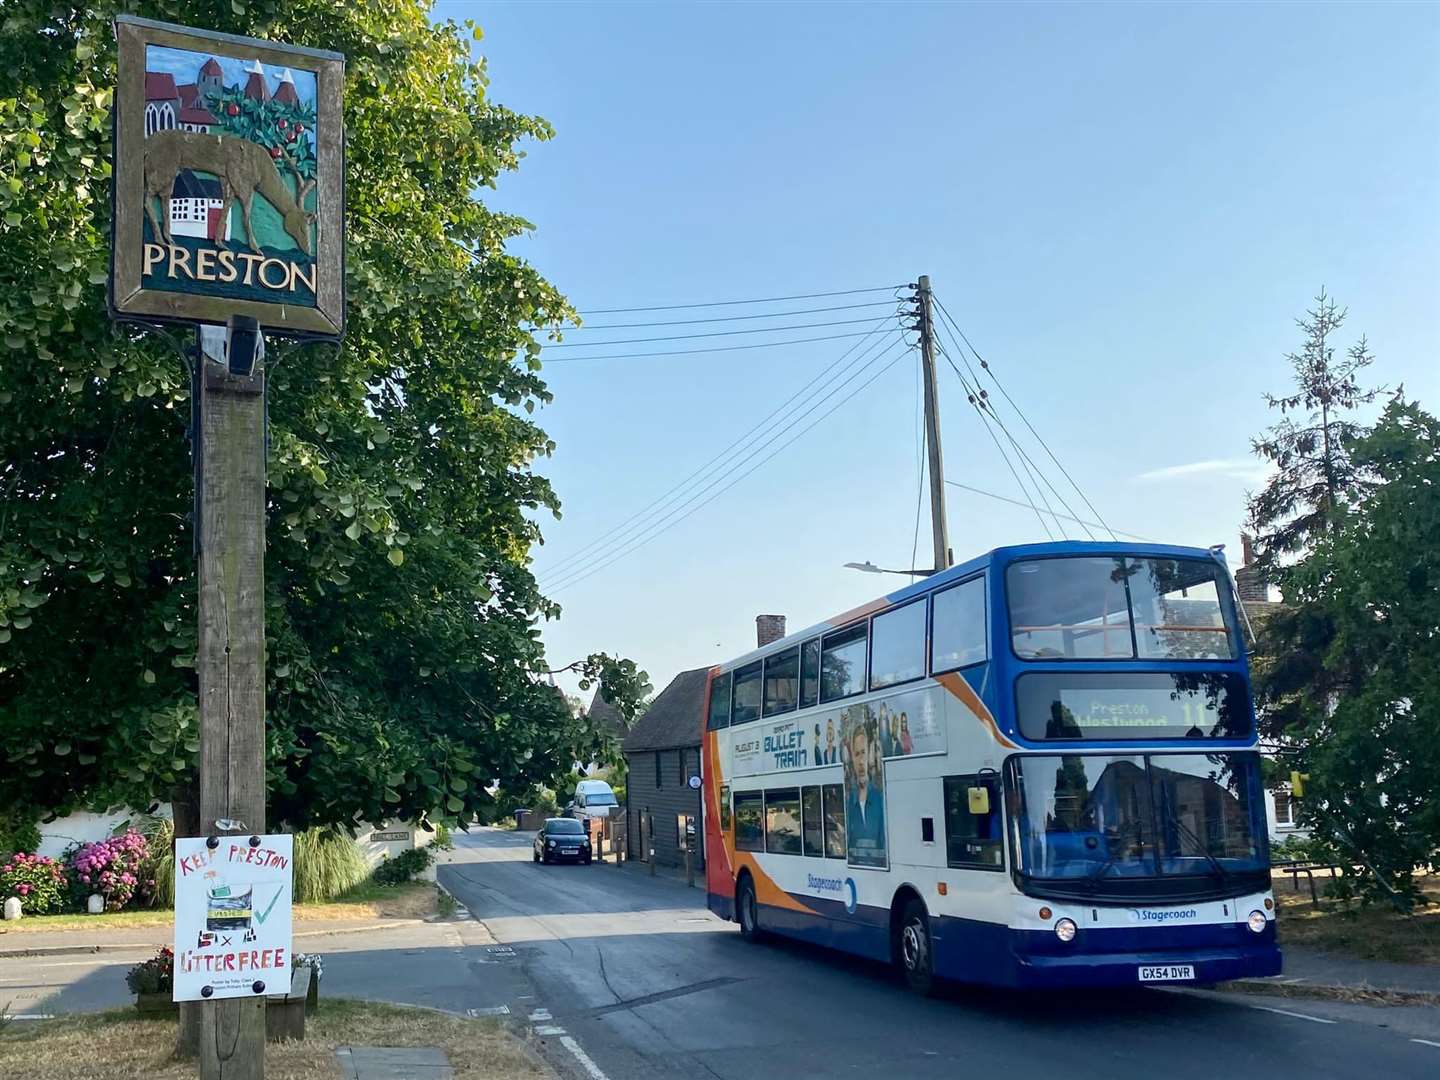 The number 11 bus is a lifeline for residents Preston